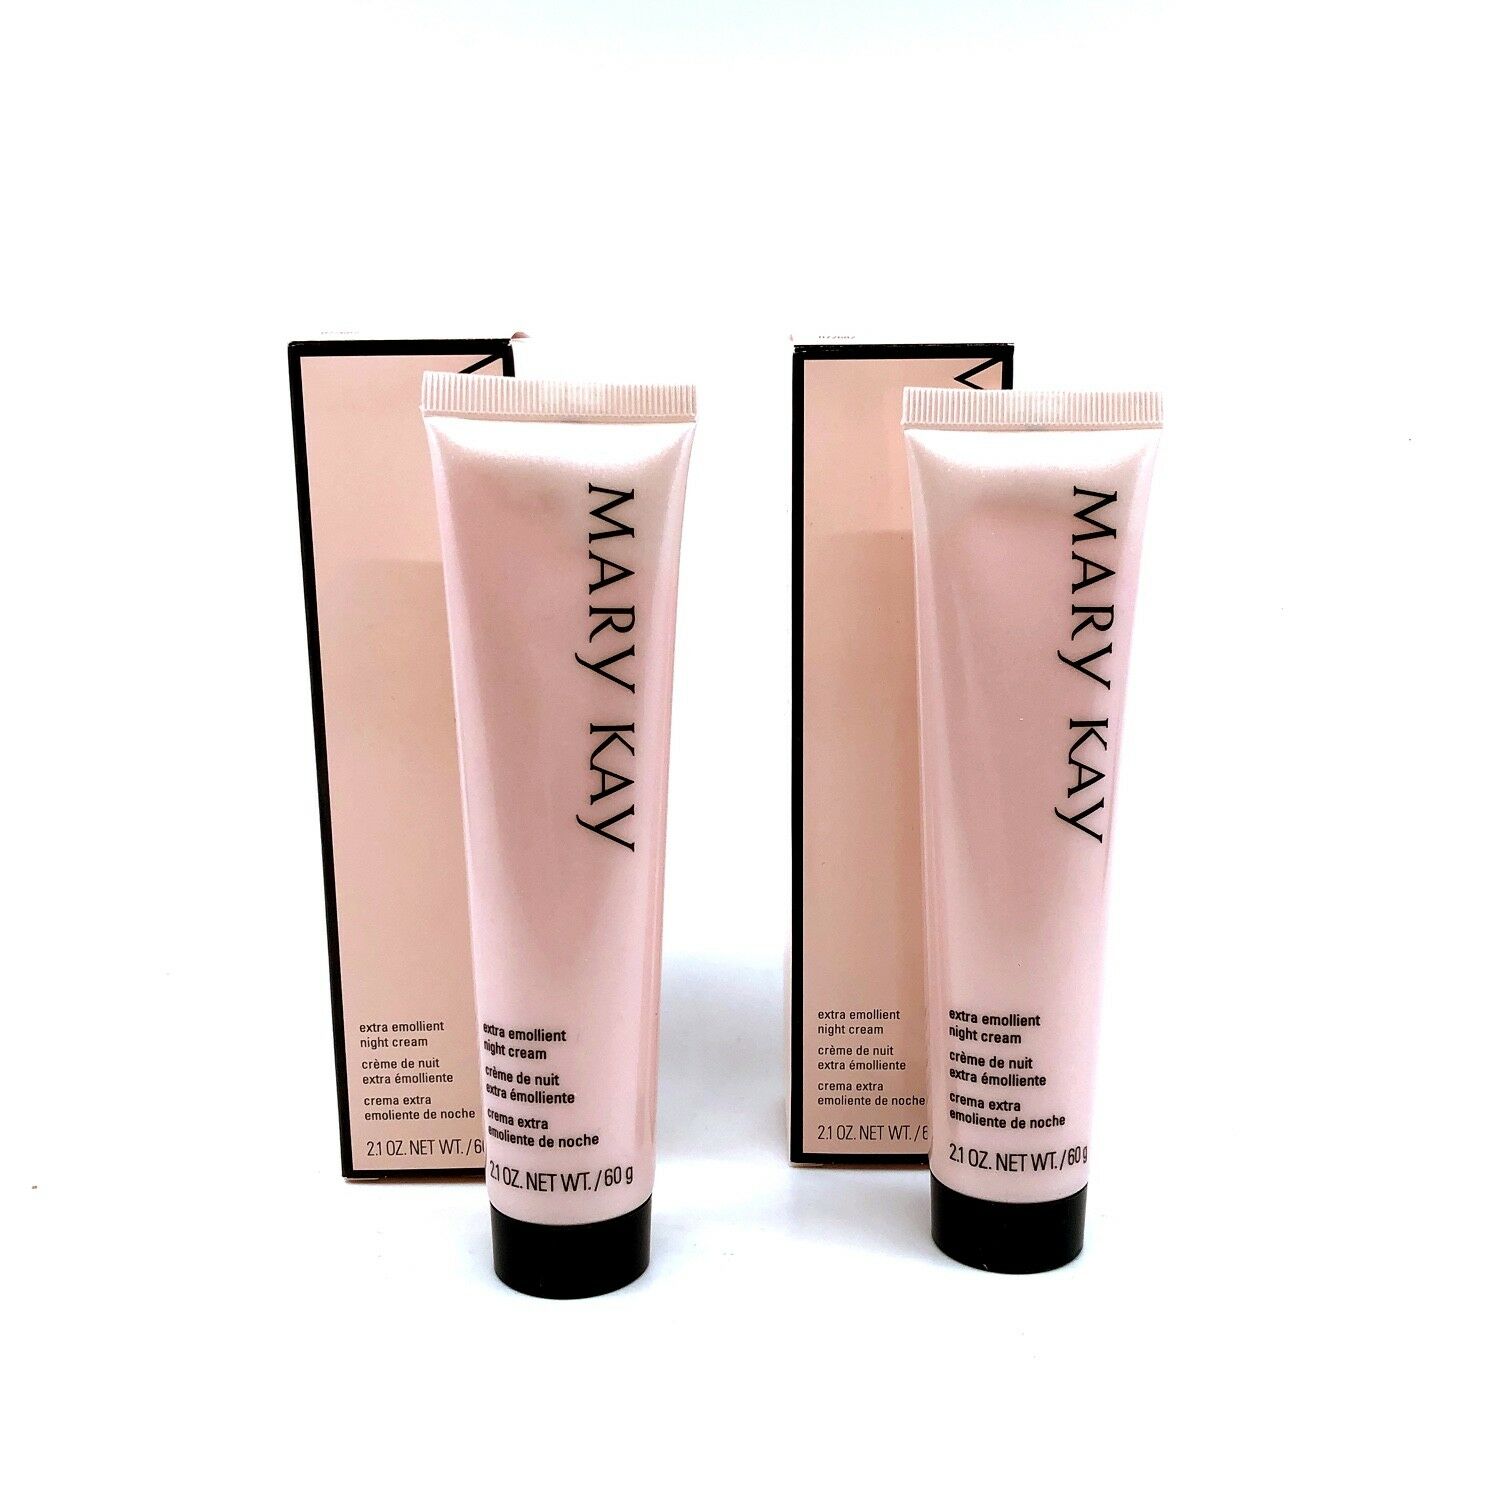 Mary Kay Extra Emollient Night Cream  2.1 Oz / 60g (2 Pack)  New! Free Shipping!